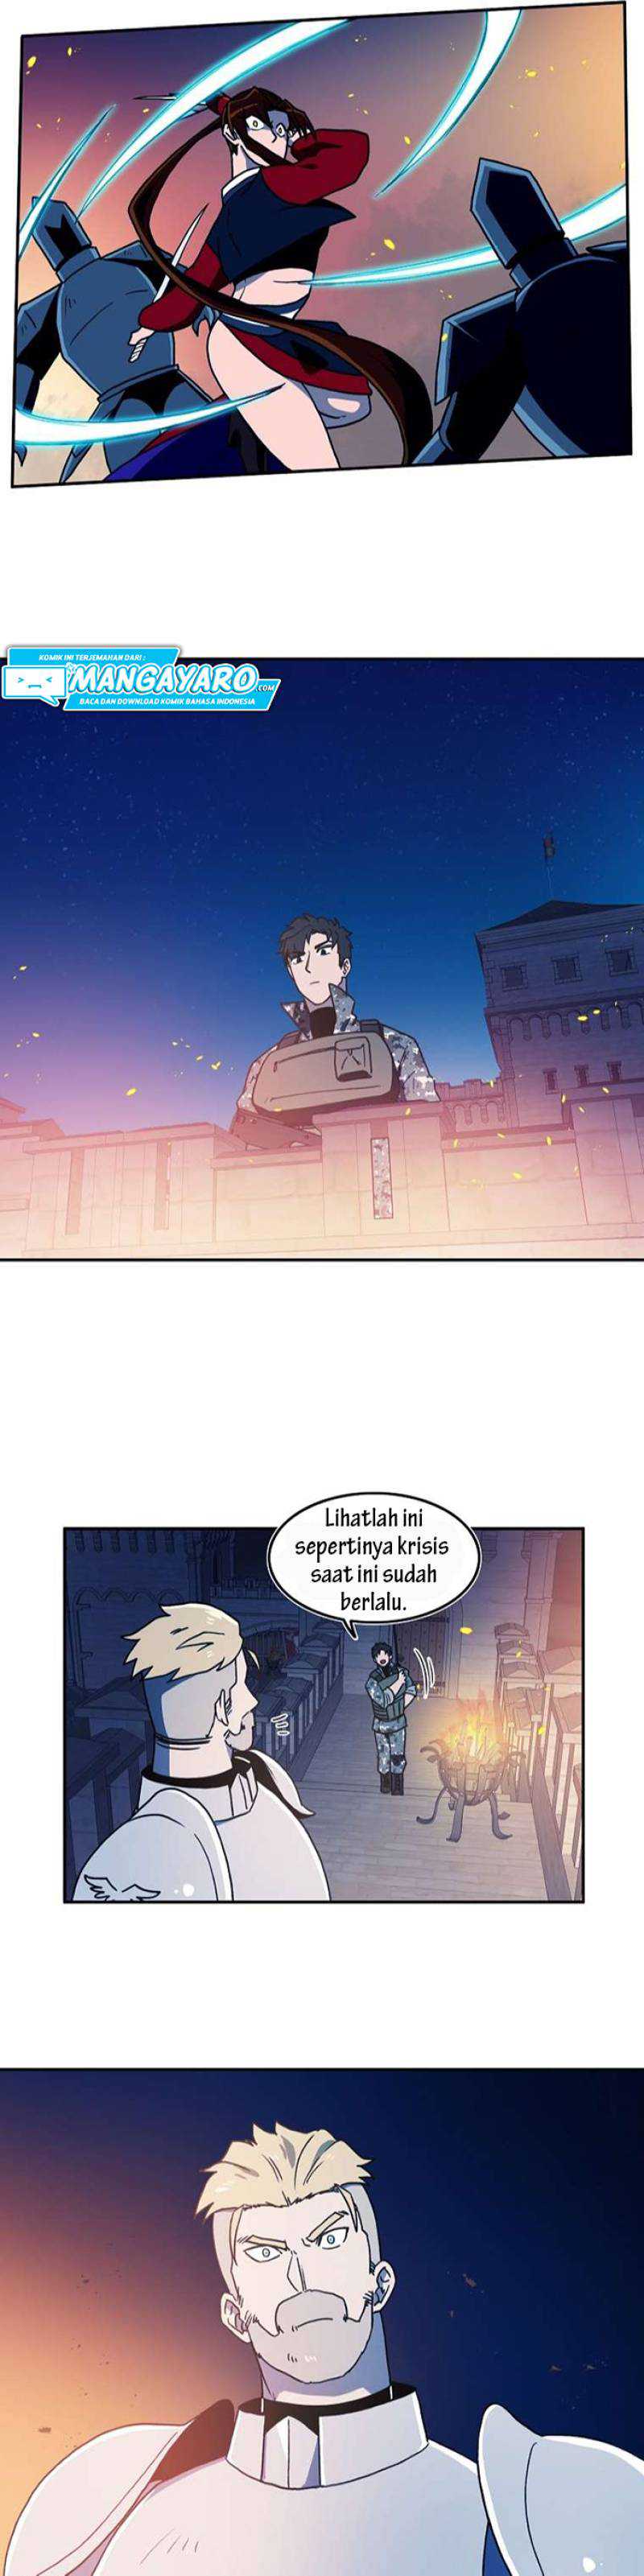 Magical Shooting : Sniper of Steel Chapter 24